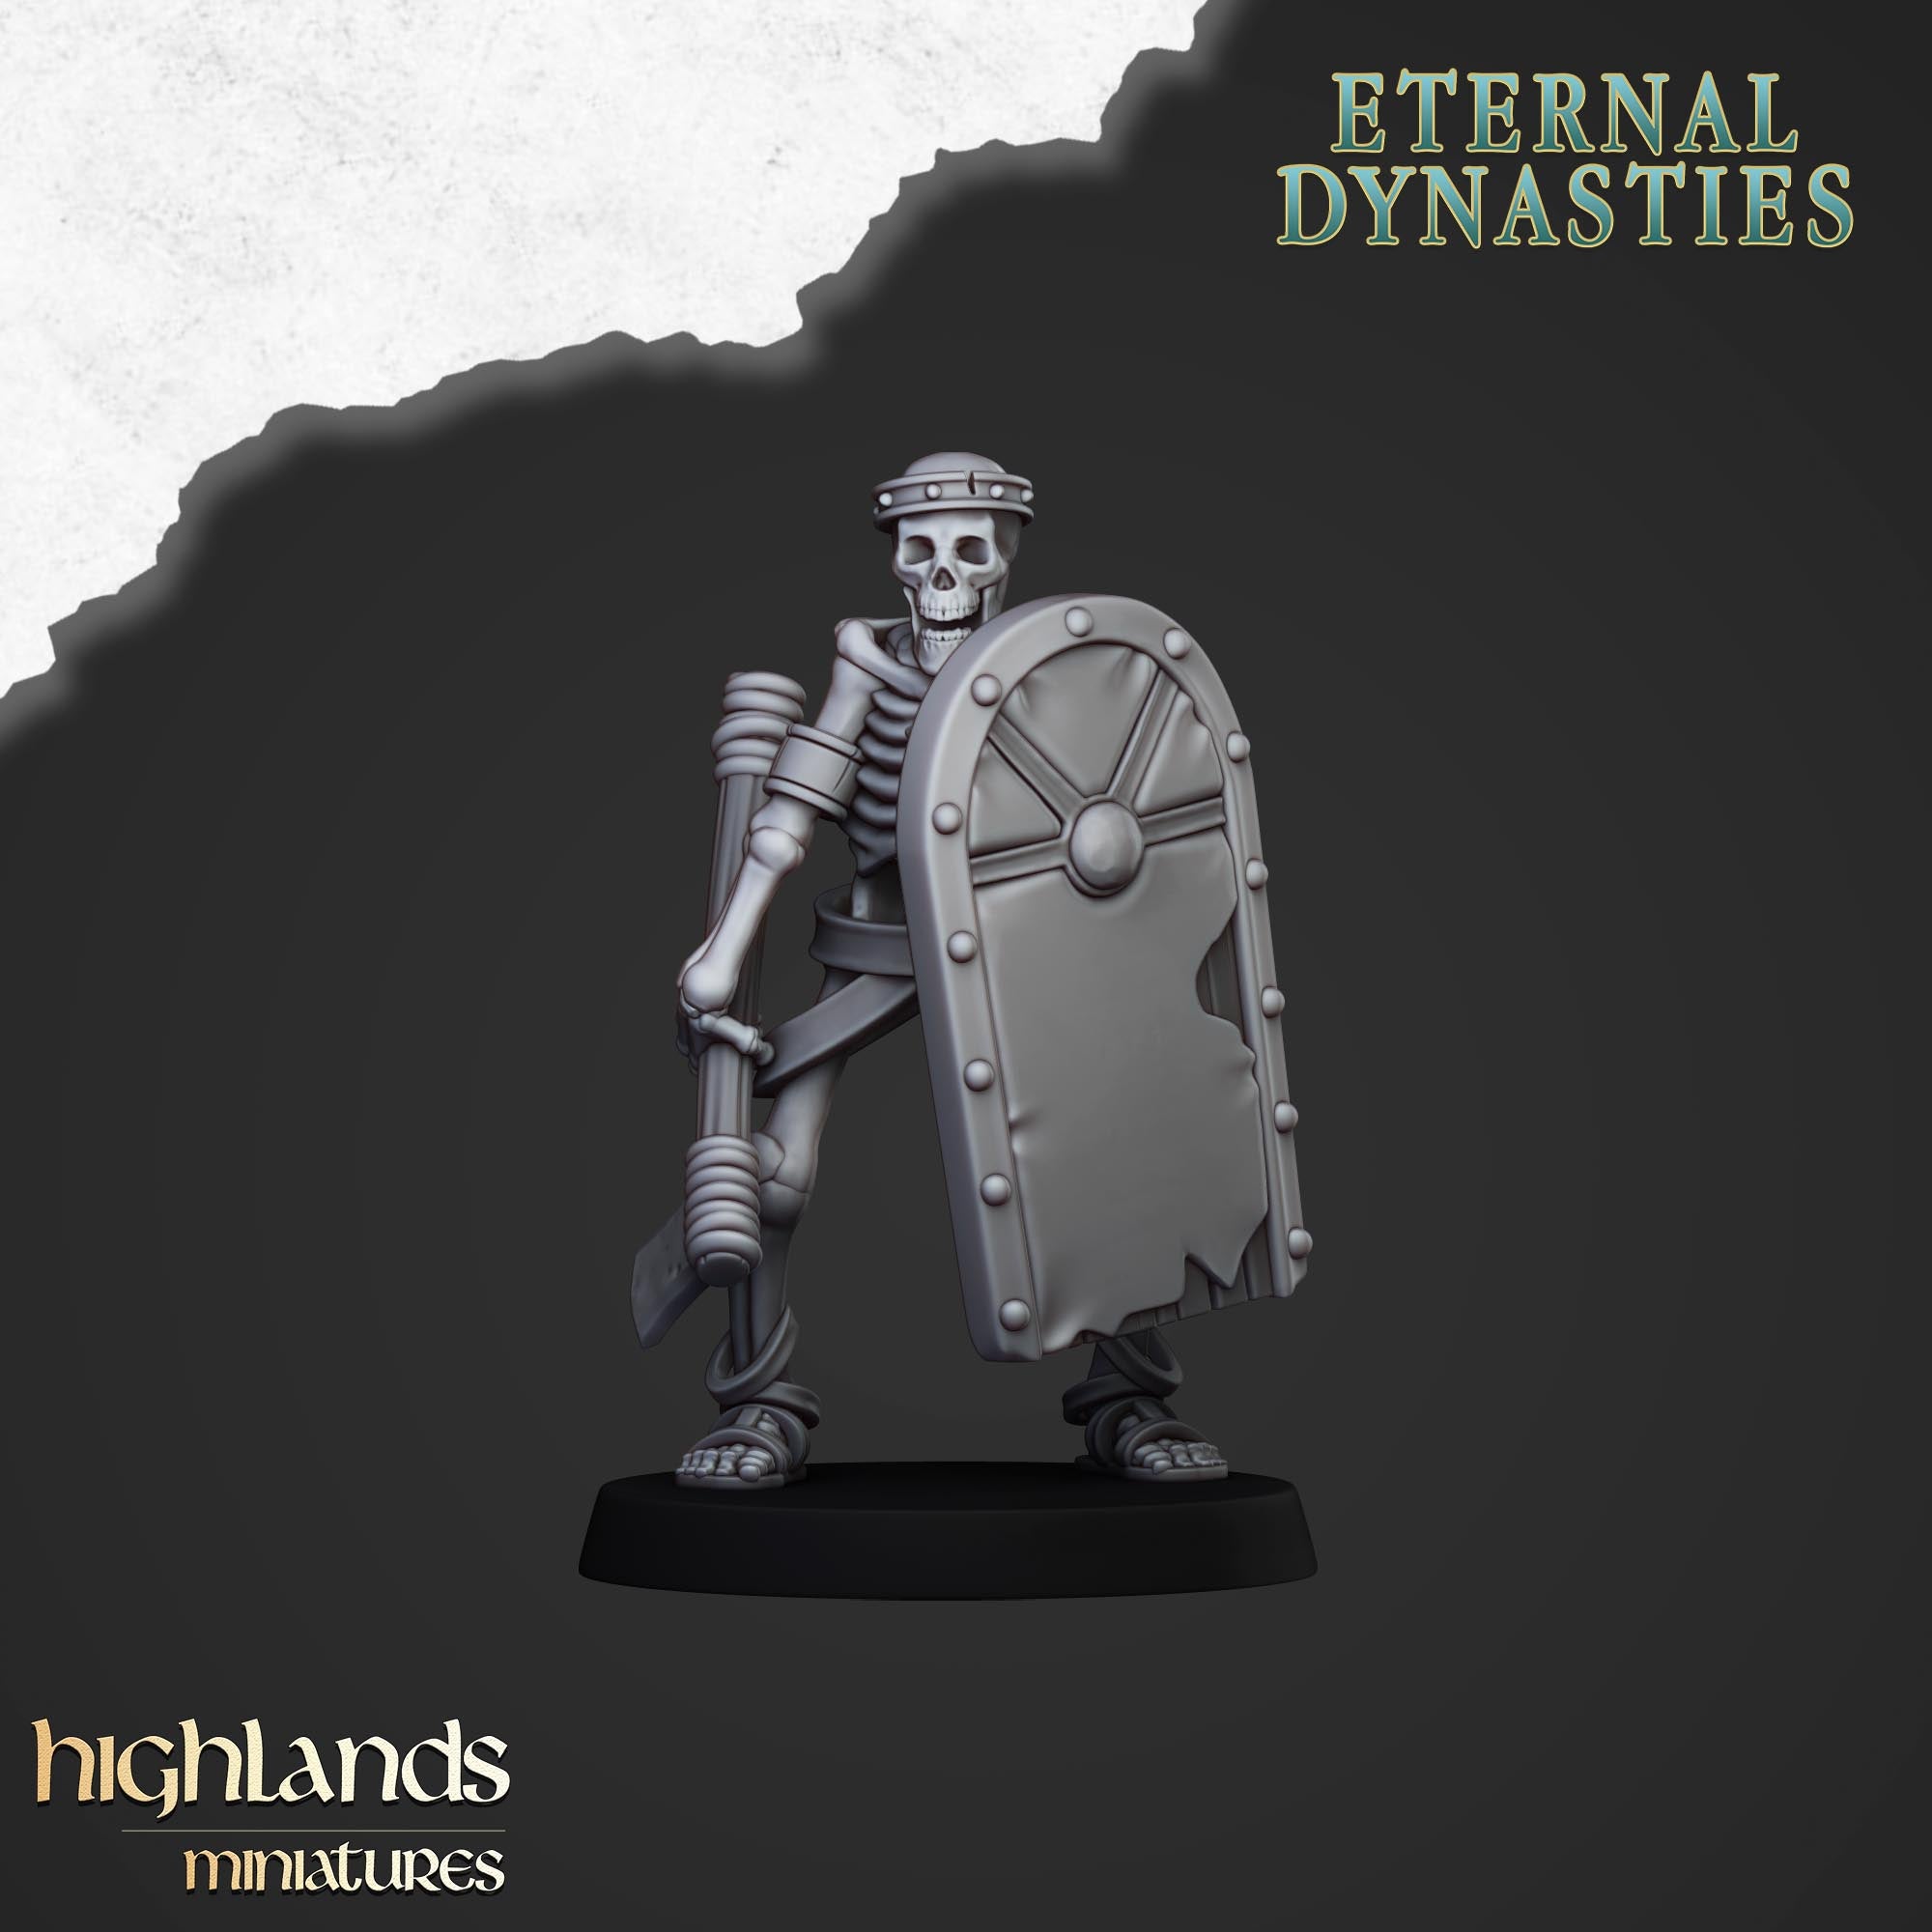 Ancient Skeletons with Hand Weapons (x15) - Eternal Dynasties - | Highlands Miniatures